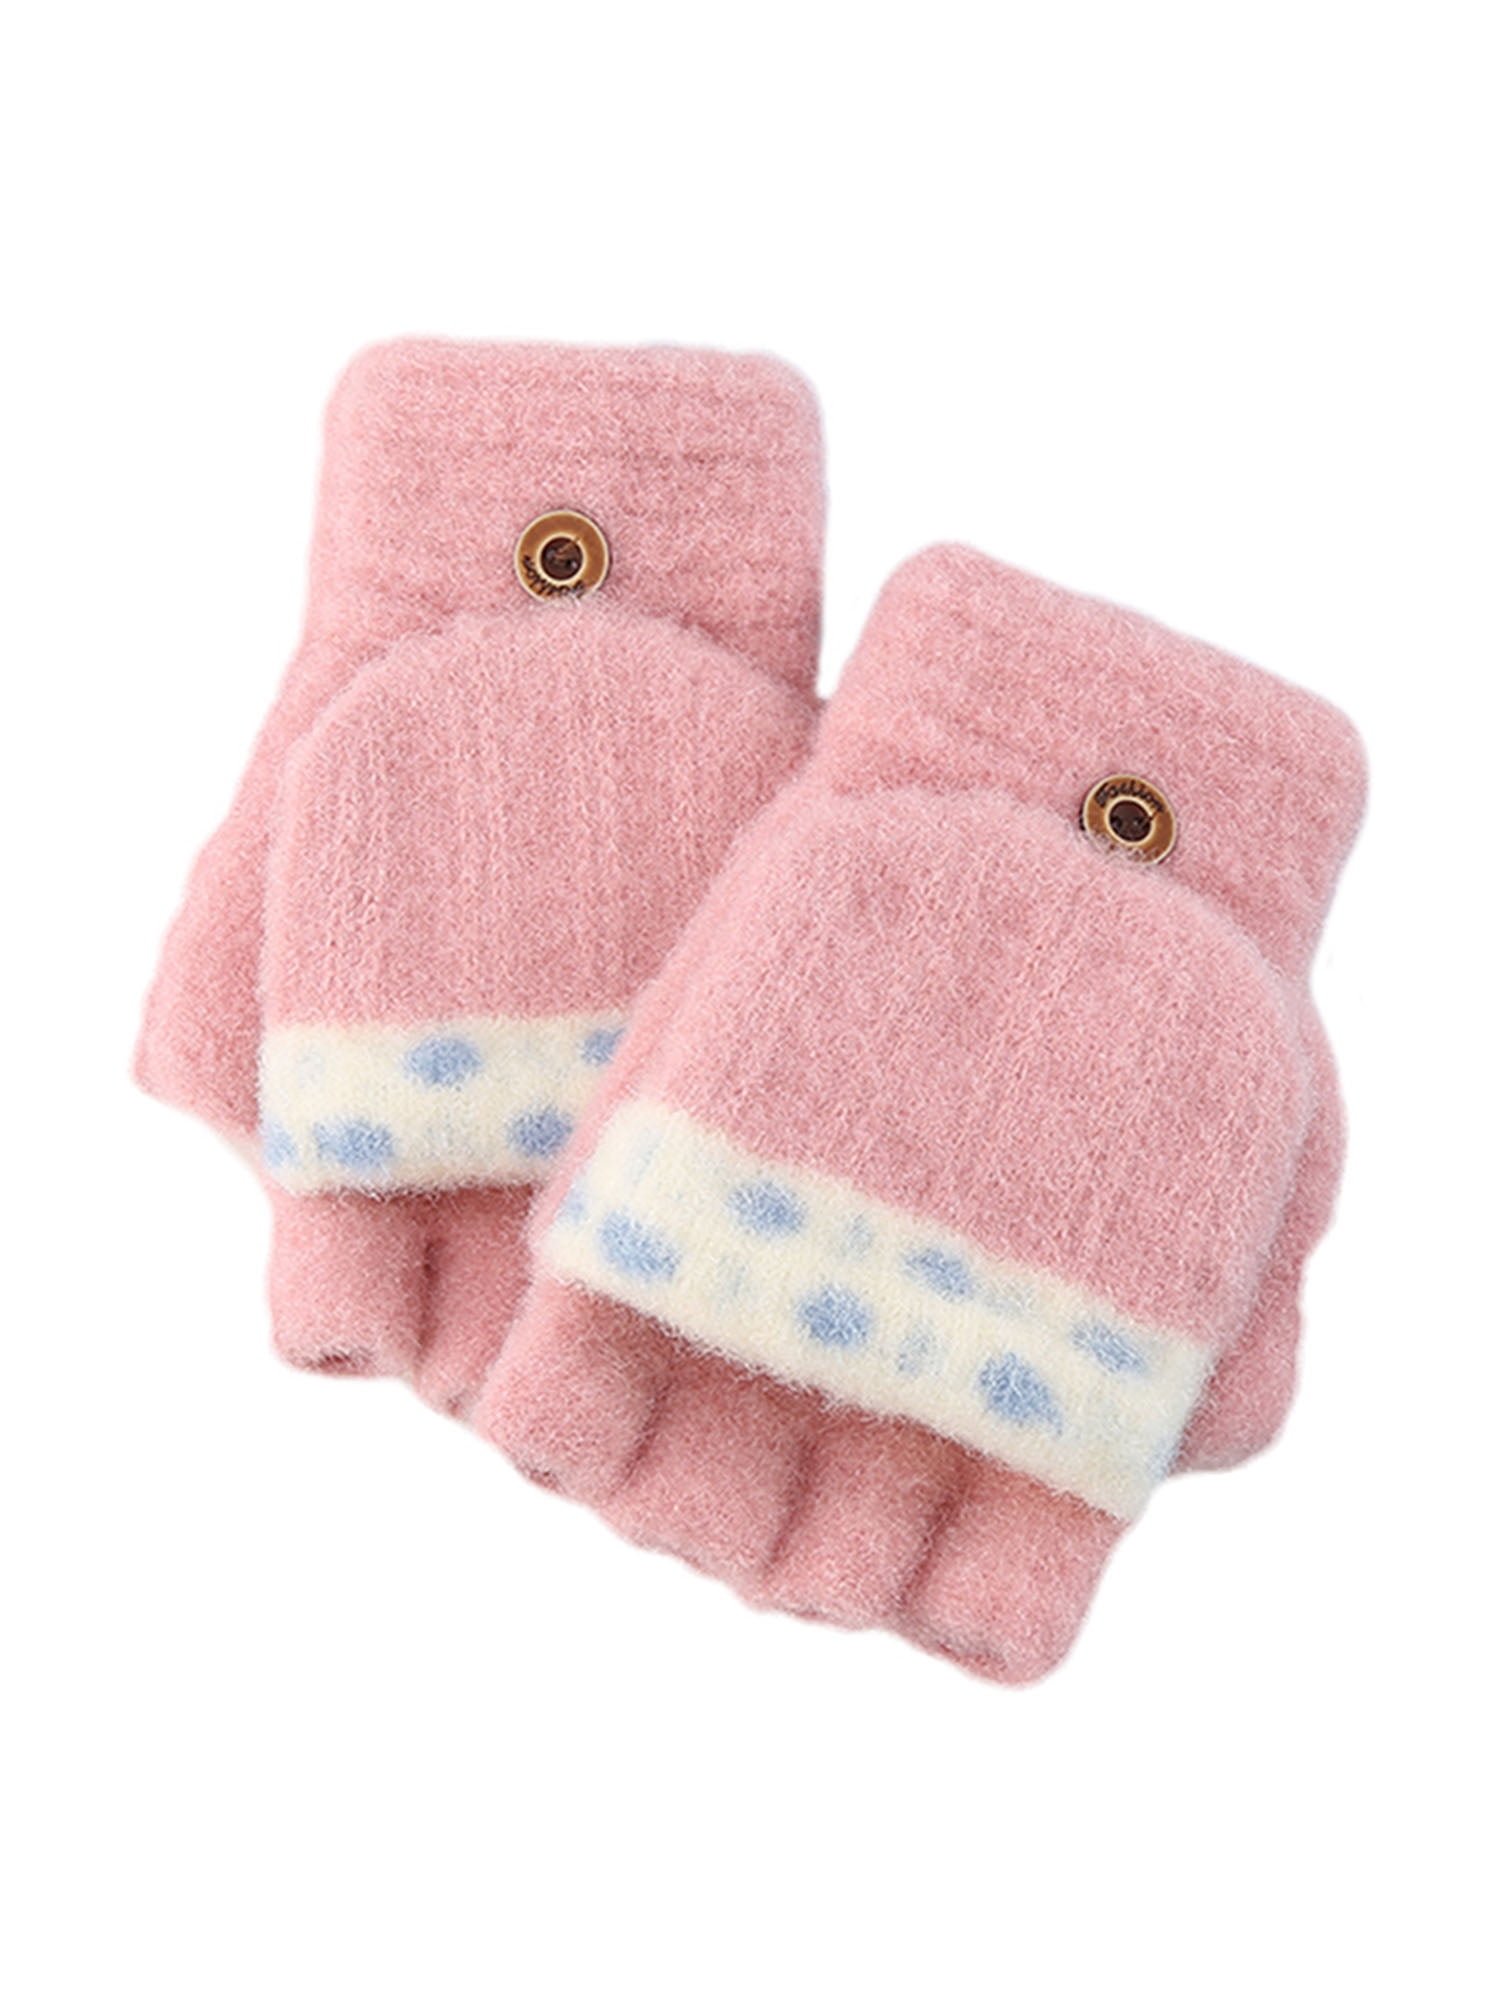 COUTEXYI Plush Half Finger Flip-open Cover Gloves, Warm Convertible ...